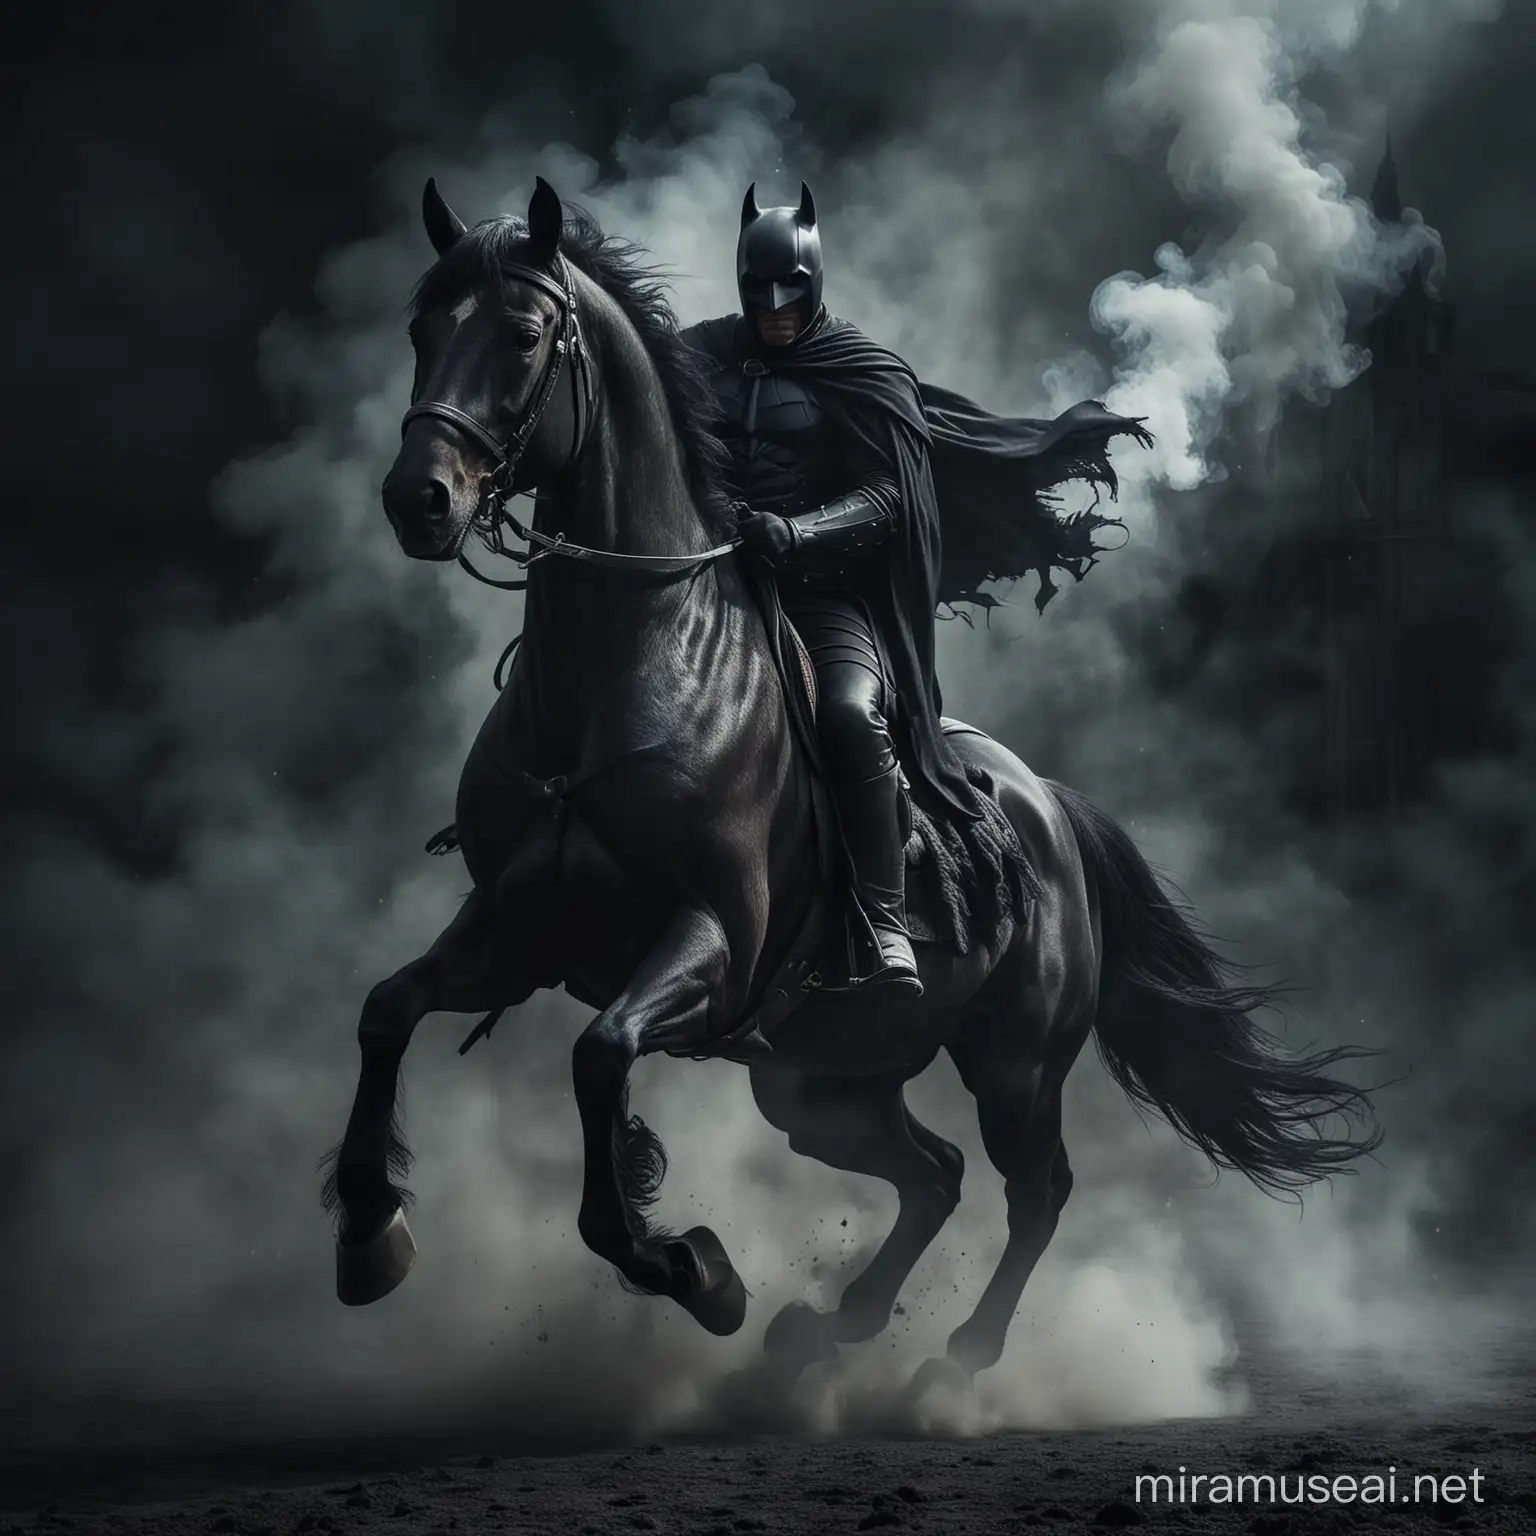 Dark Knight on a Black Horse with an Evil Aura in a Dramatic Smokefilled Setting